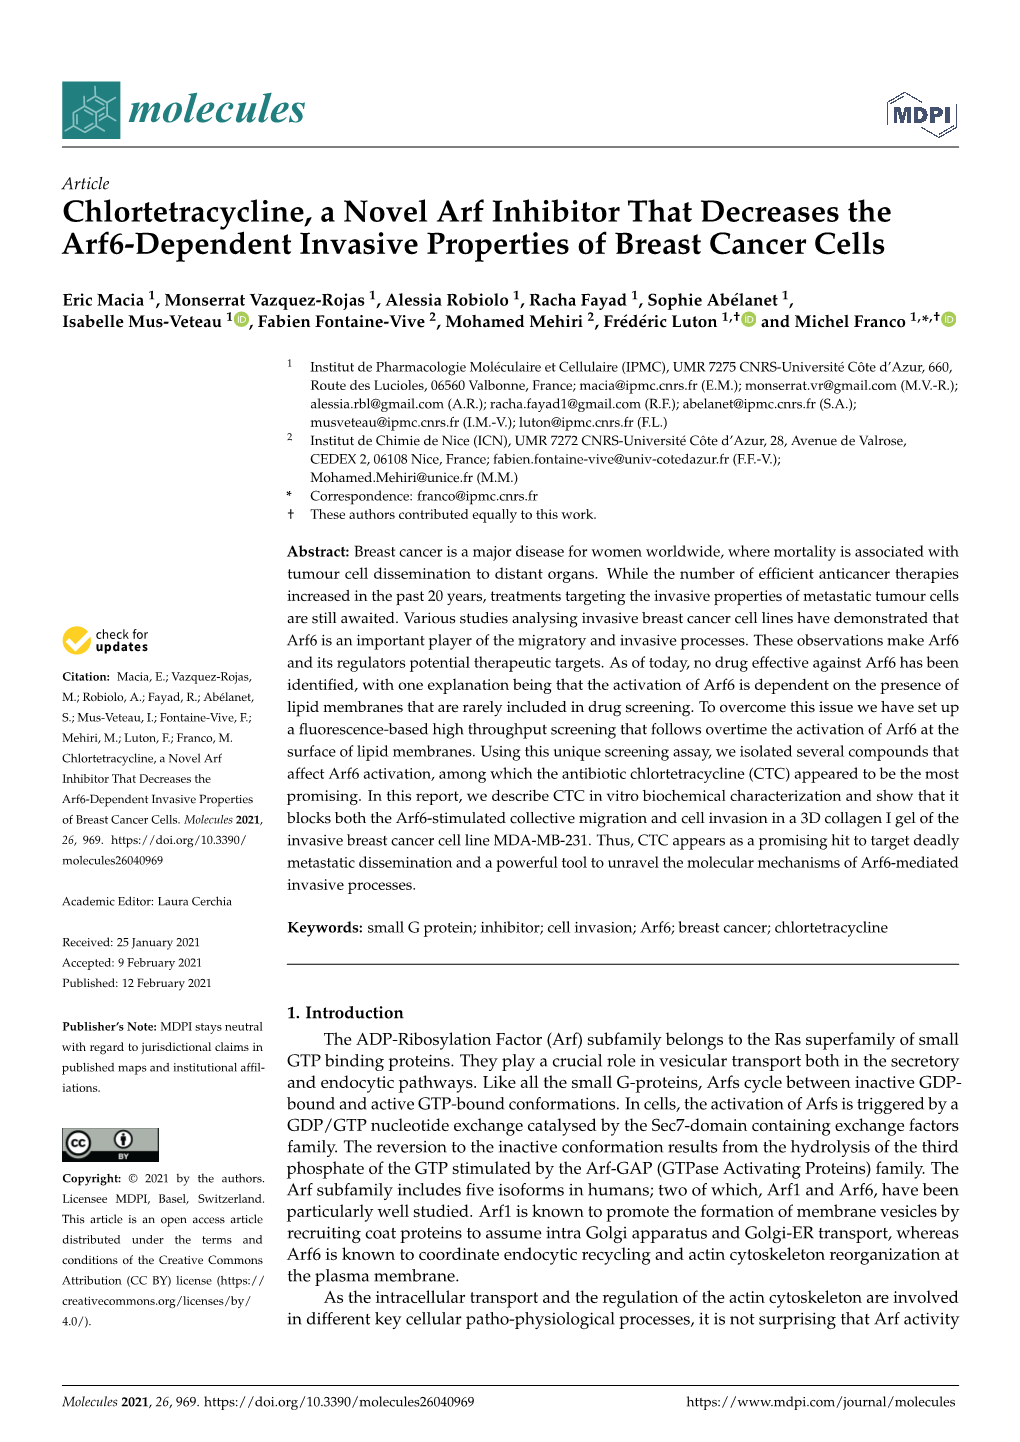 Chlortetracycline, a Novel Arf Inhibitor That Decreases the Arf6-Dependent Invasive Properties of Breast Cancer Cells